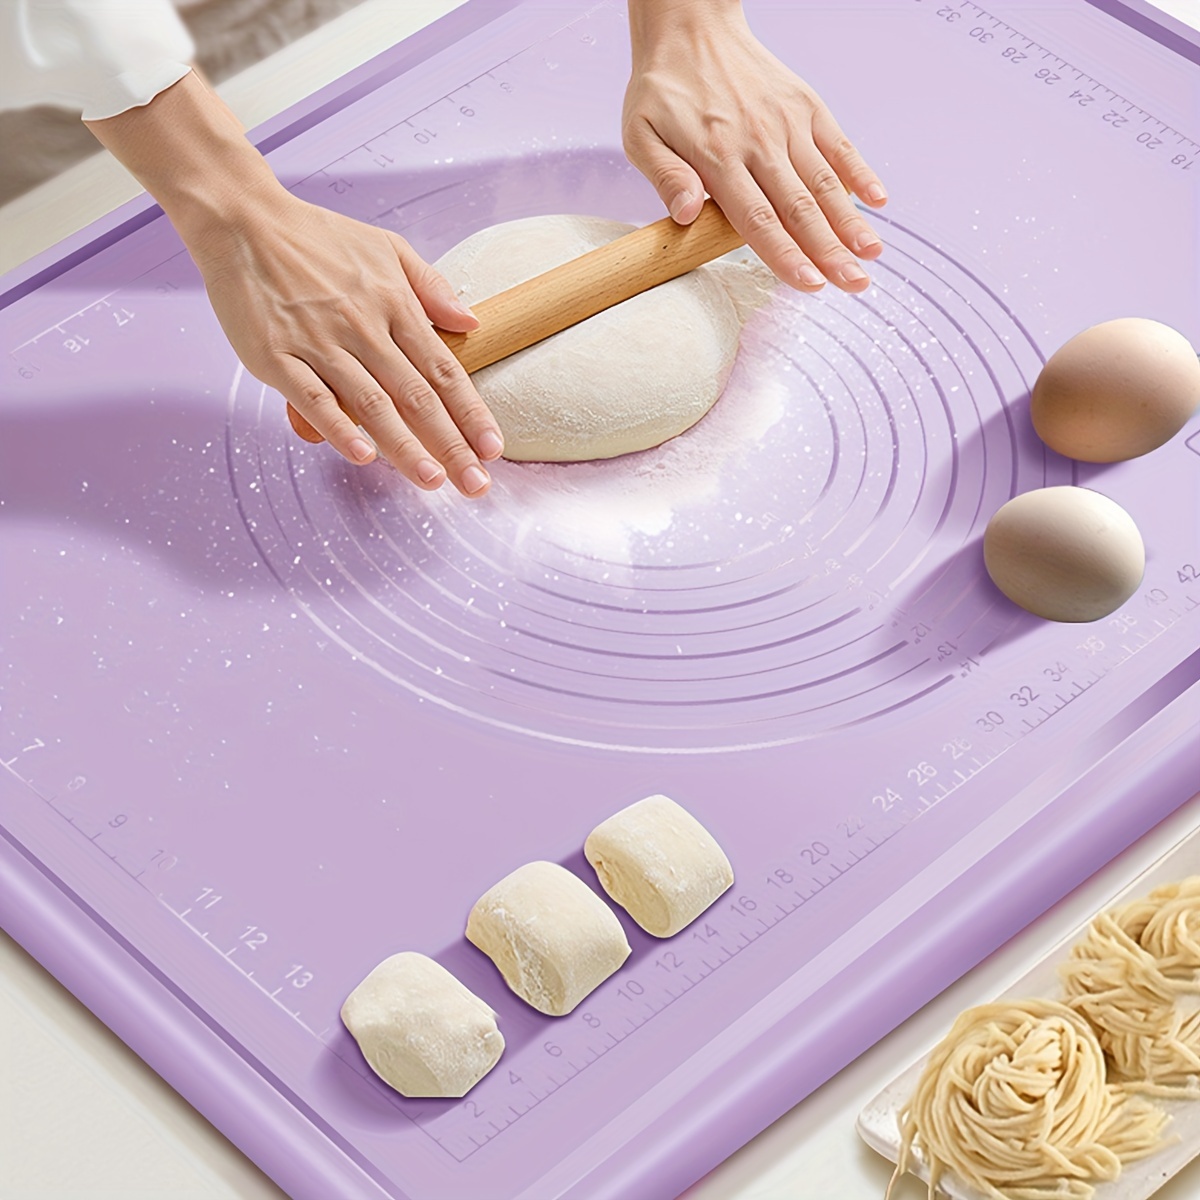 

Silicone Baking Mat - Thick Food Grade Silicone Pastry Mat For Rolling Dough, Nonstick Kneading Board For Baking, Dough Rolling And Pastry Mat For Dumplings And Cookies.